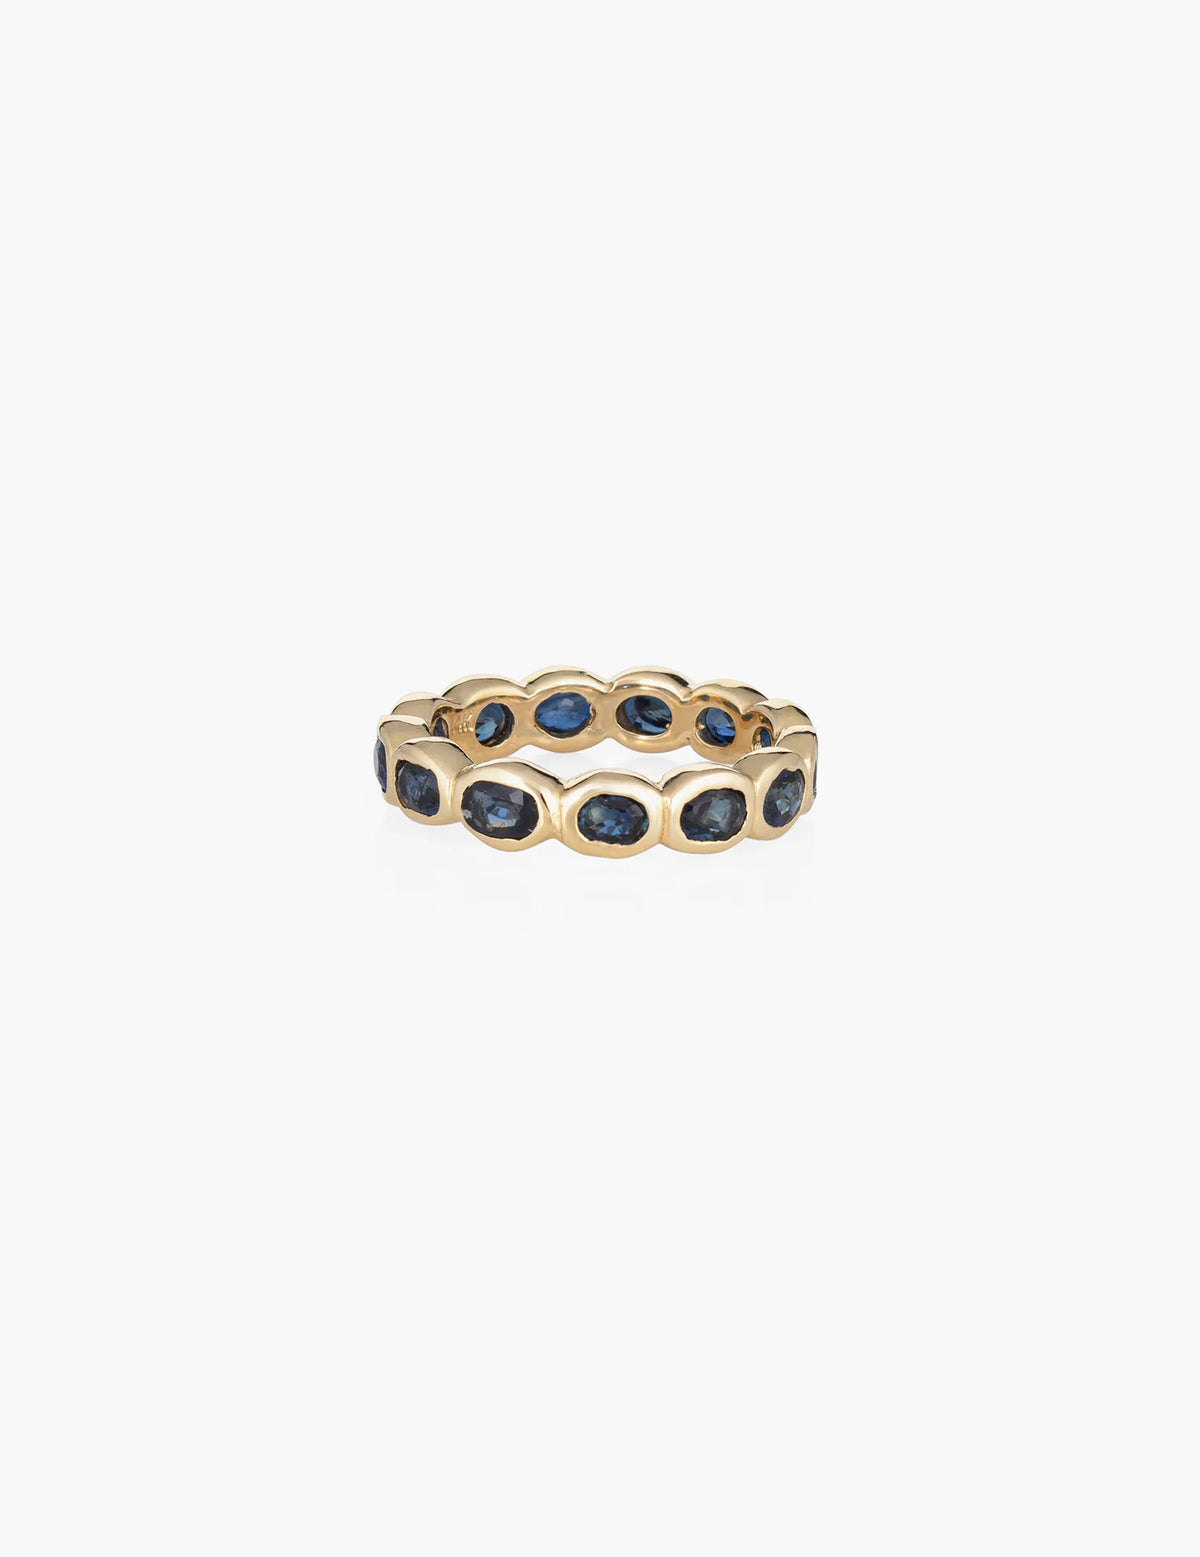 Oval Blue Sapphire Eternity Band